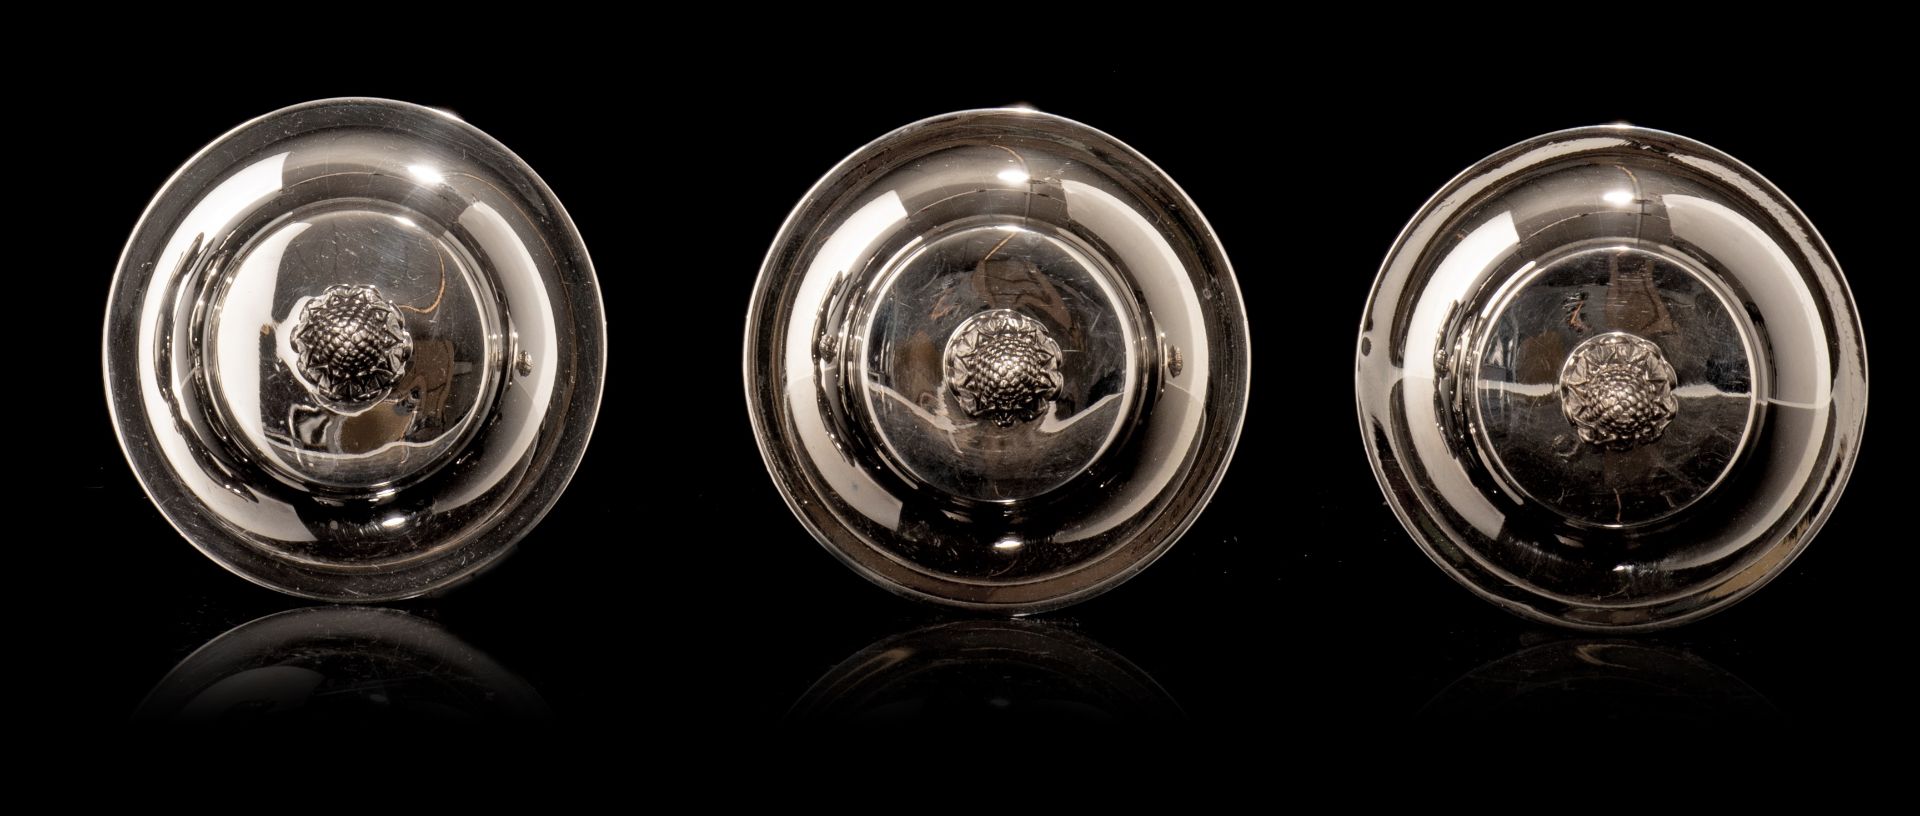 An interesting collection of silver-plated items by Christofle - France, model Malmaison - Image 8 of 16